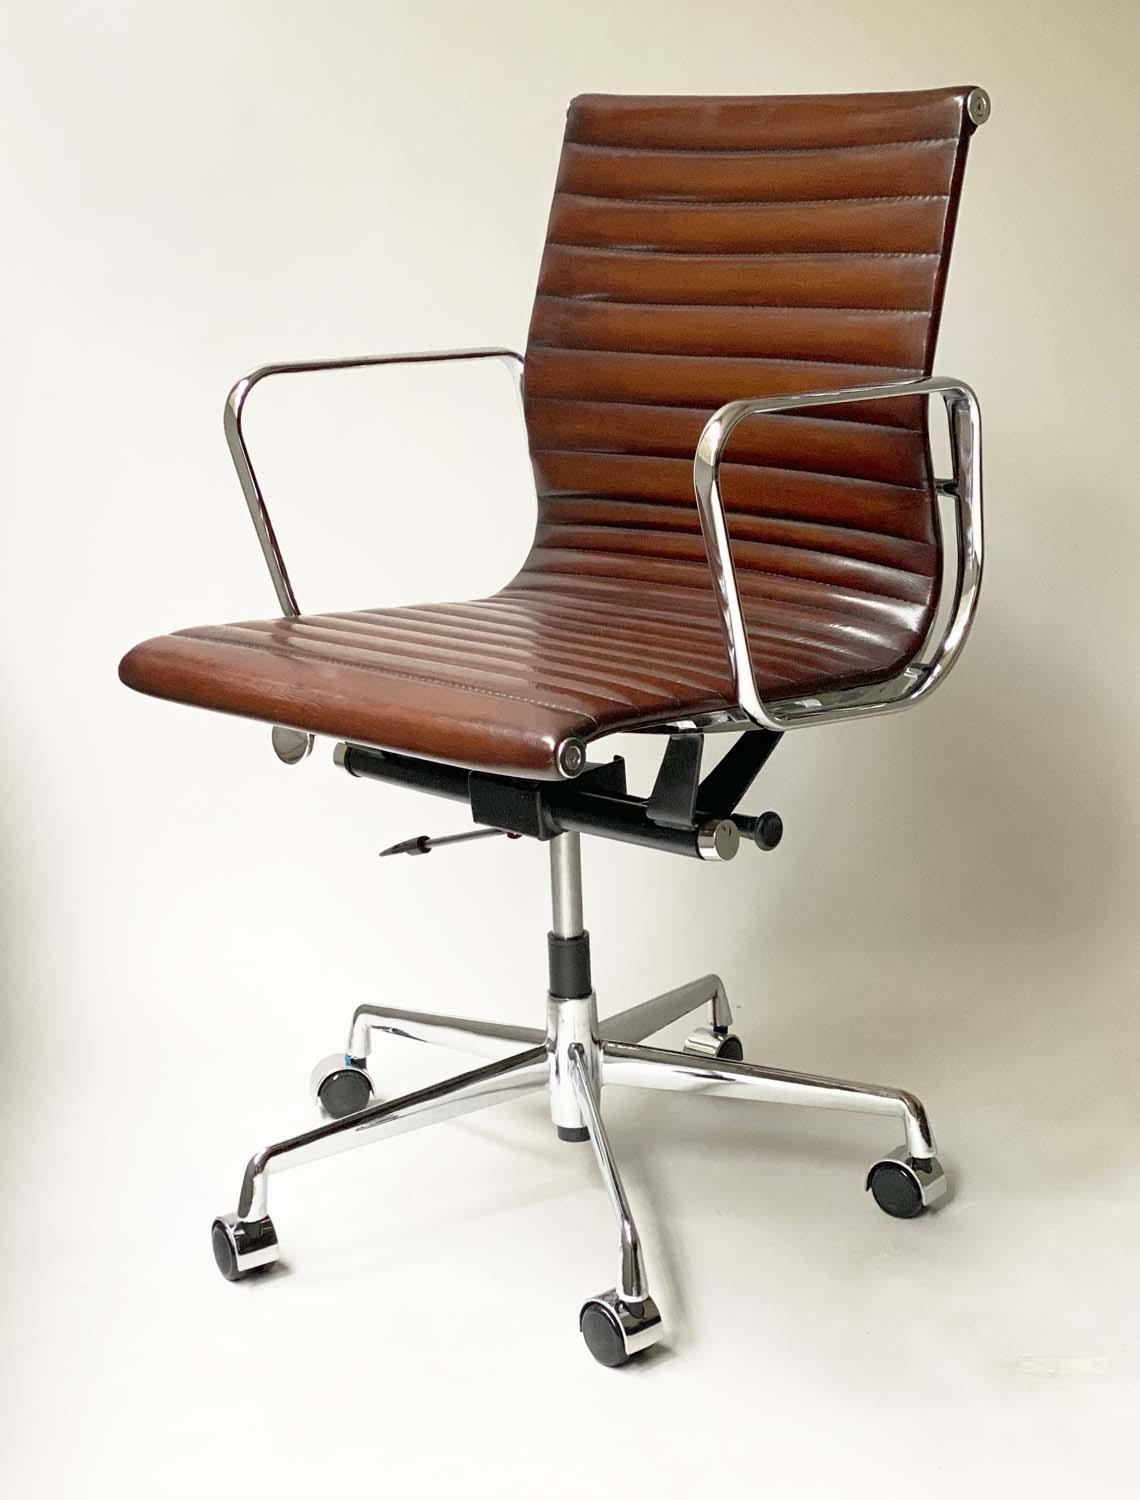 REVOLVING DESK CHAIR, Charles and Ray Eames inspired ribbed soft natural tan brown hand finished